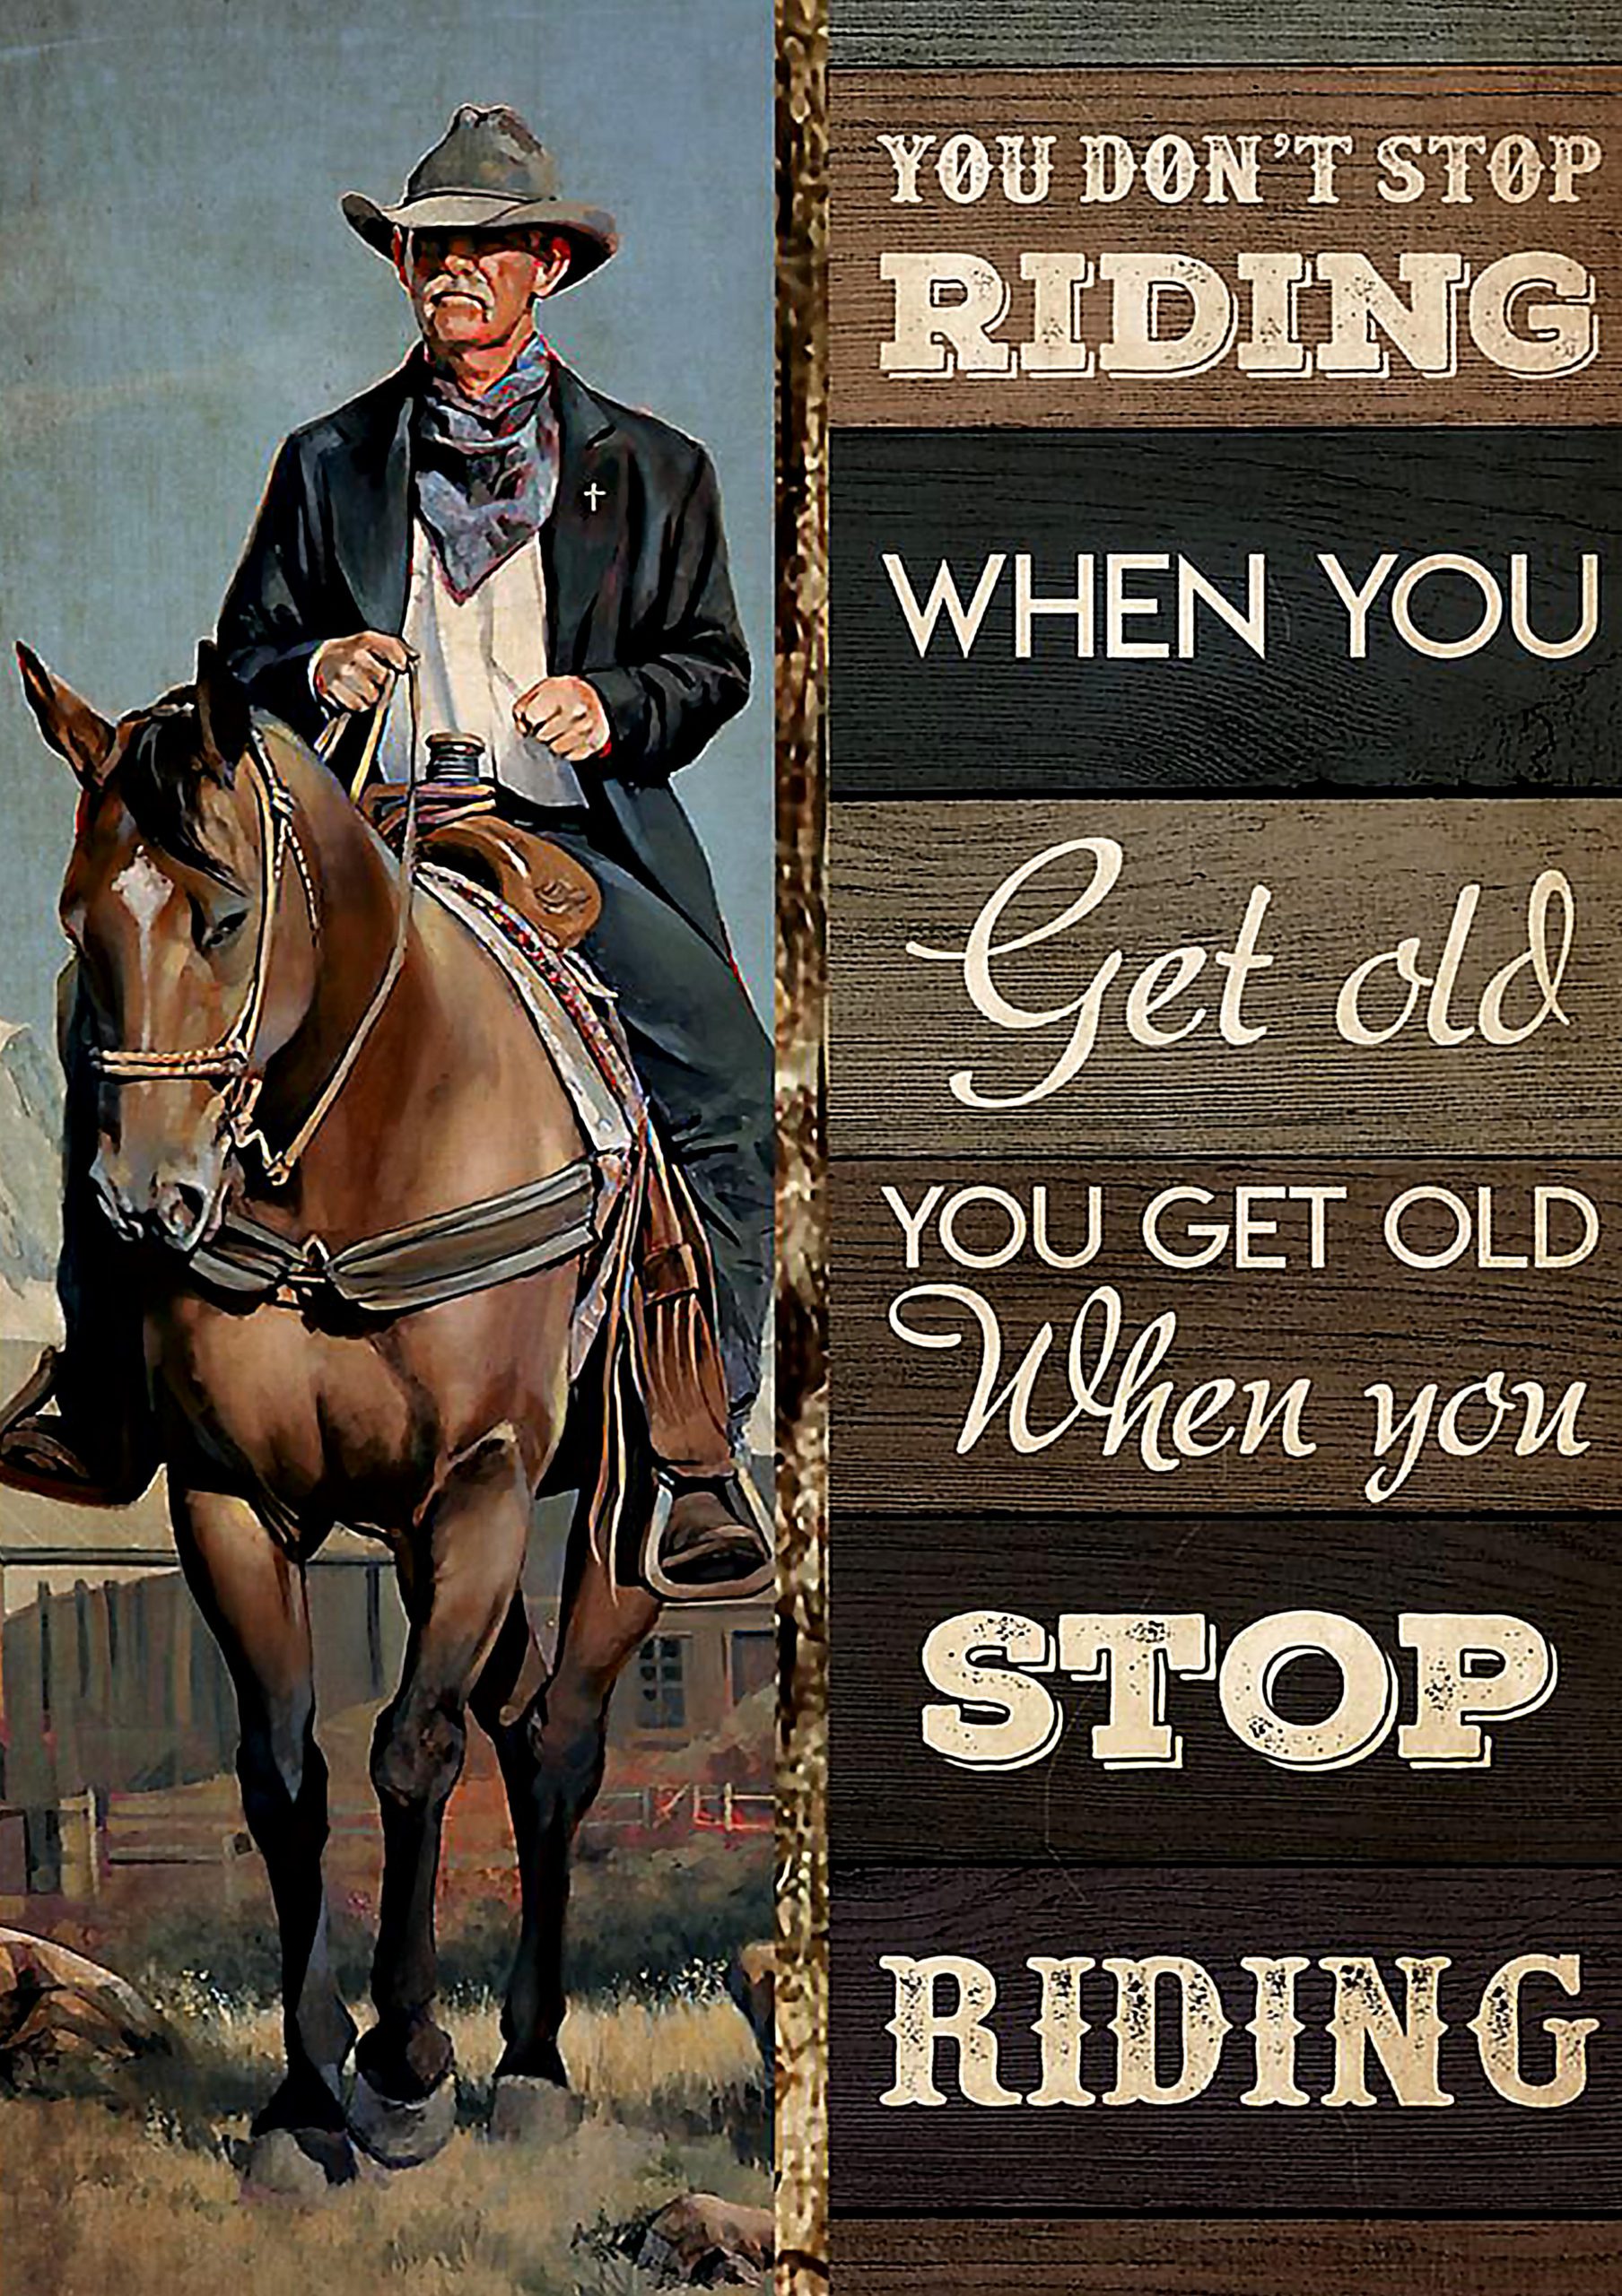 vintage old cowboy you dont stop riding when you get old poster 1 - Copy